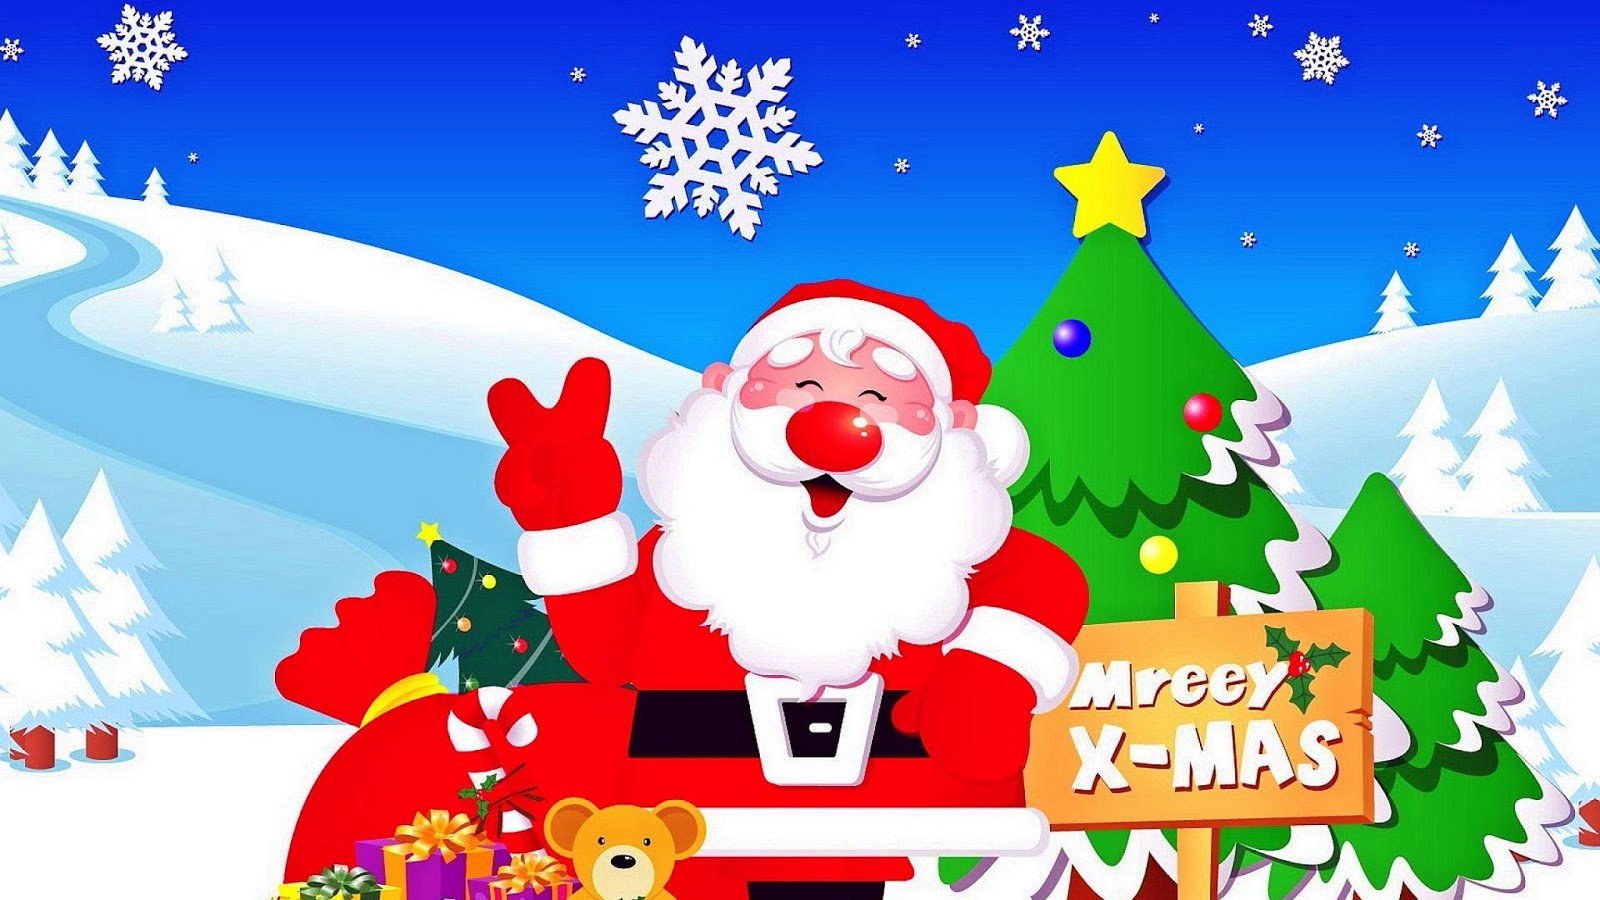 Merry Christmas 2015 Wallpapers, Images, Pics  Happy 